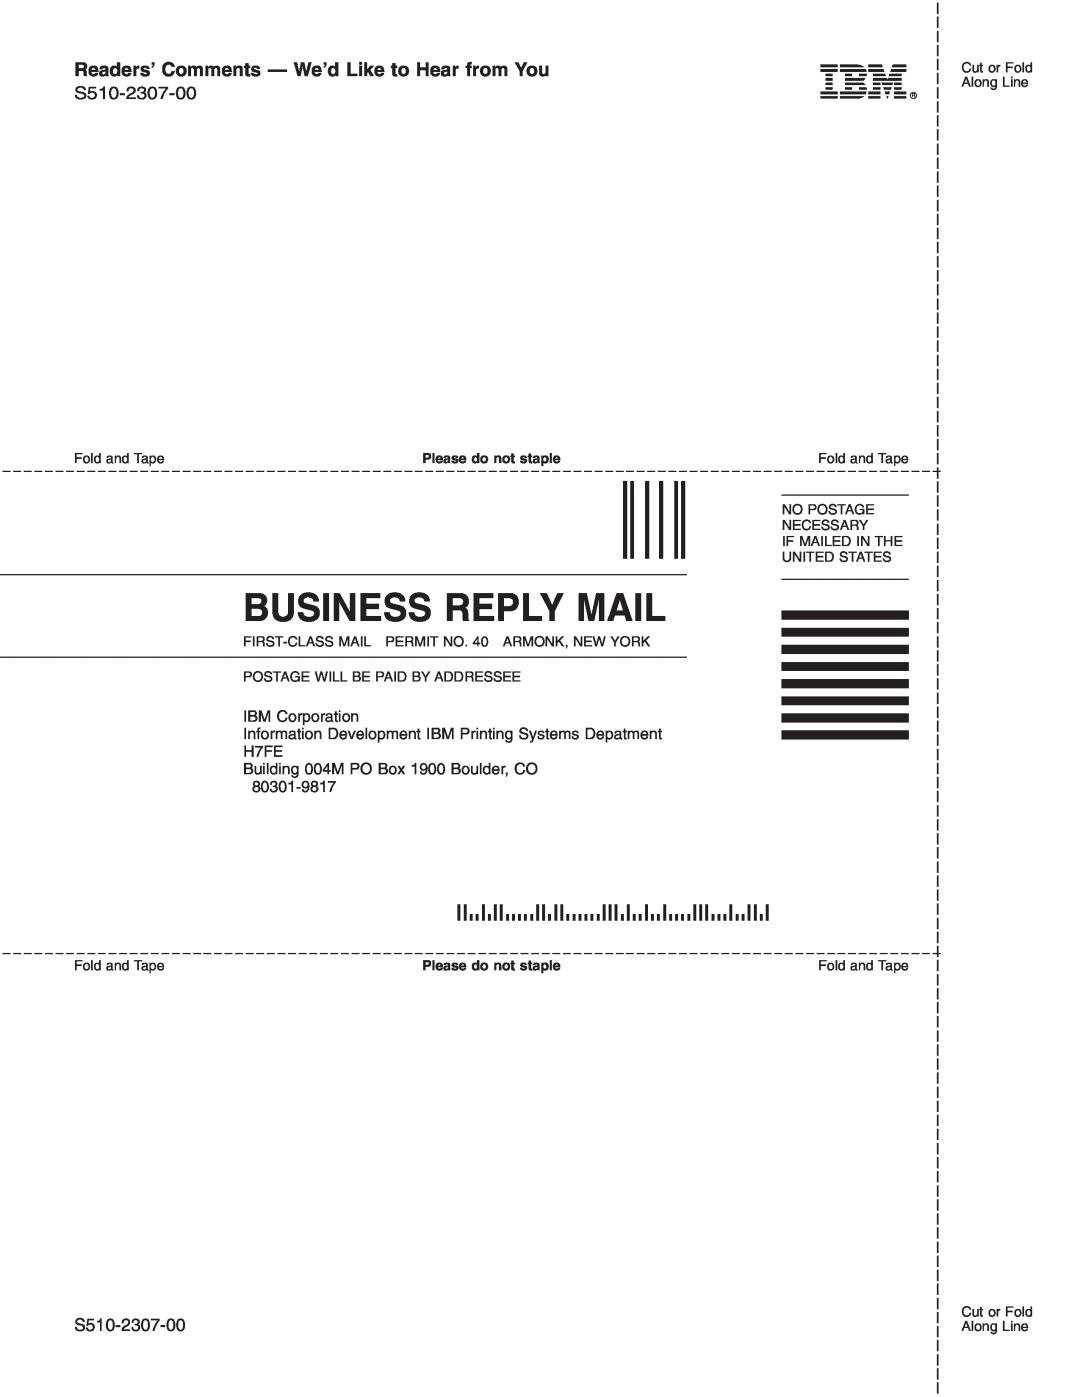 Lexmark Infoprint 1116 Business Reply Mail, Readers’ Comments - We’d Like to Hear from You, Please do not staple 